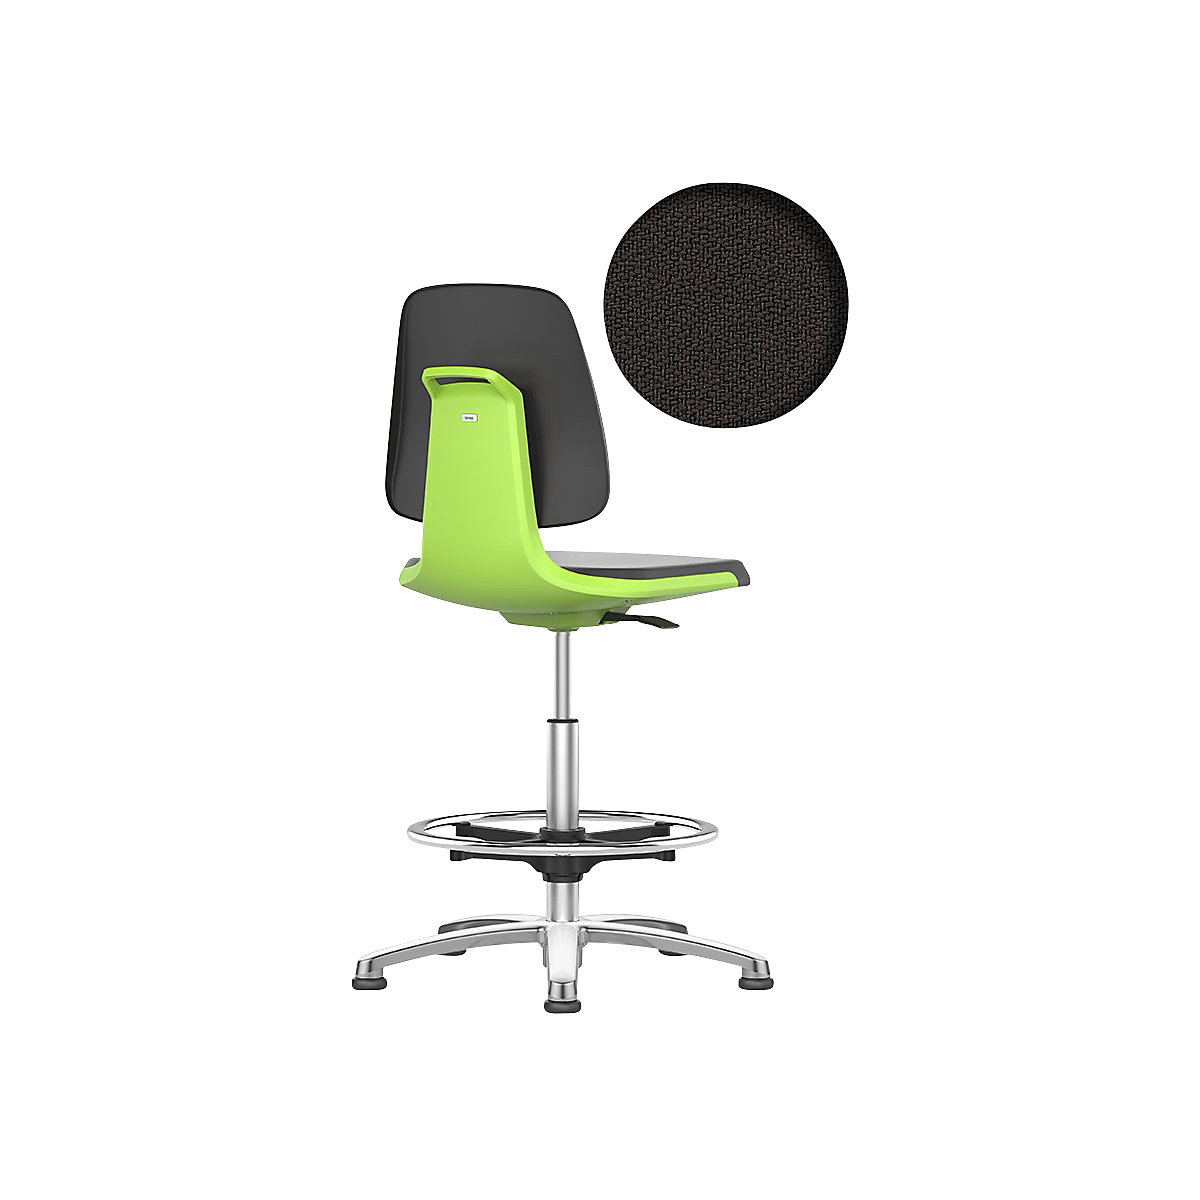 LABSIT industrial swivel chair – bimos, with floor glides and foot ring, fabric upholstered seat, green-19